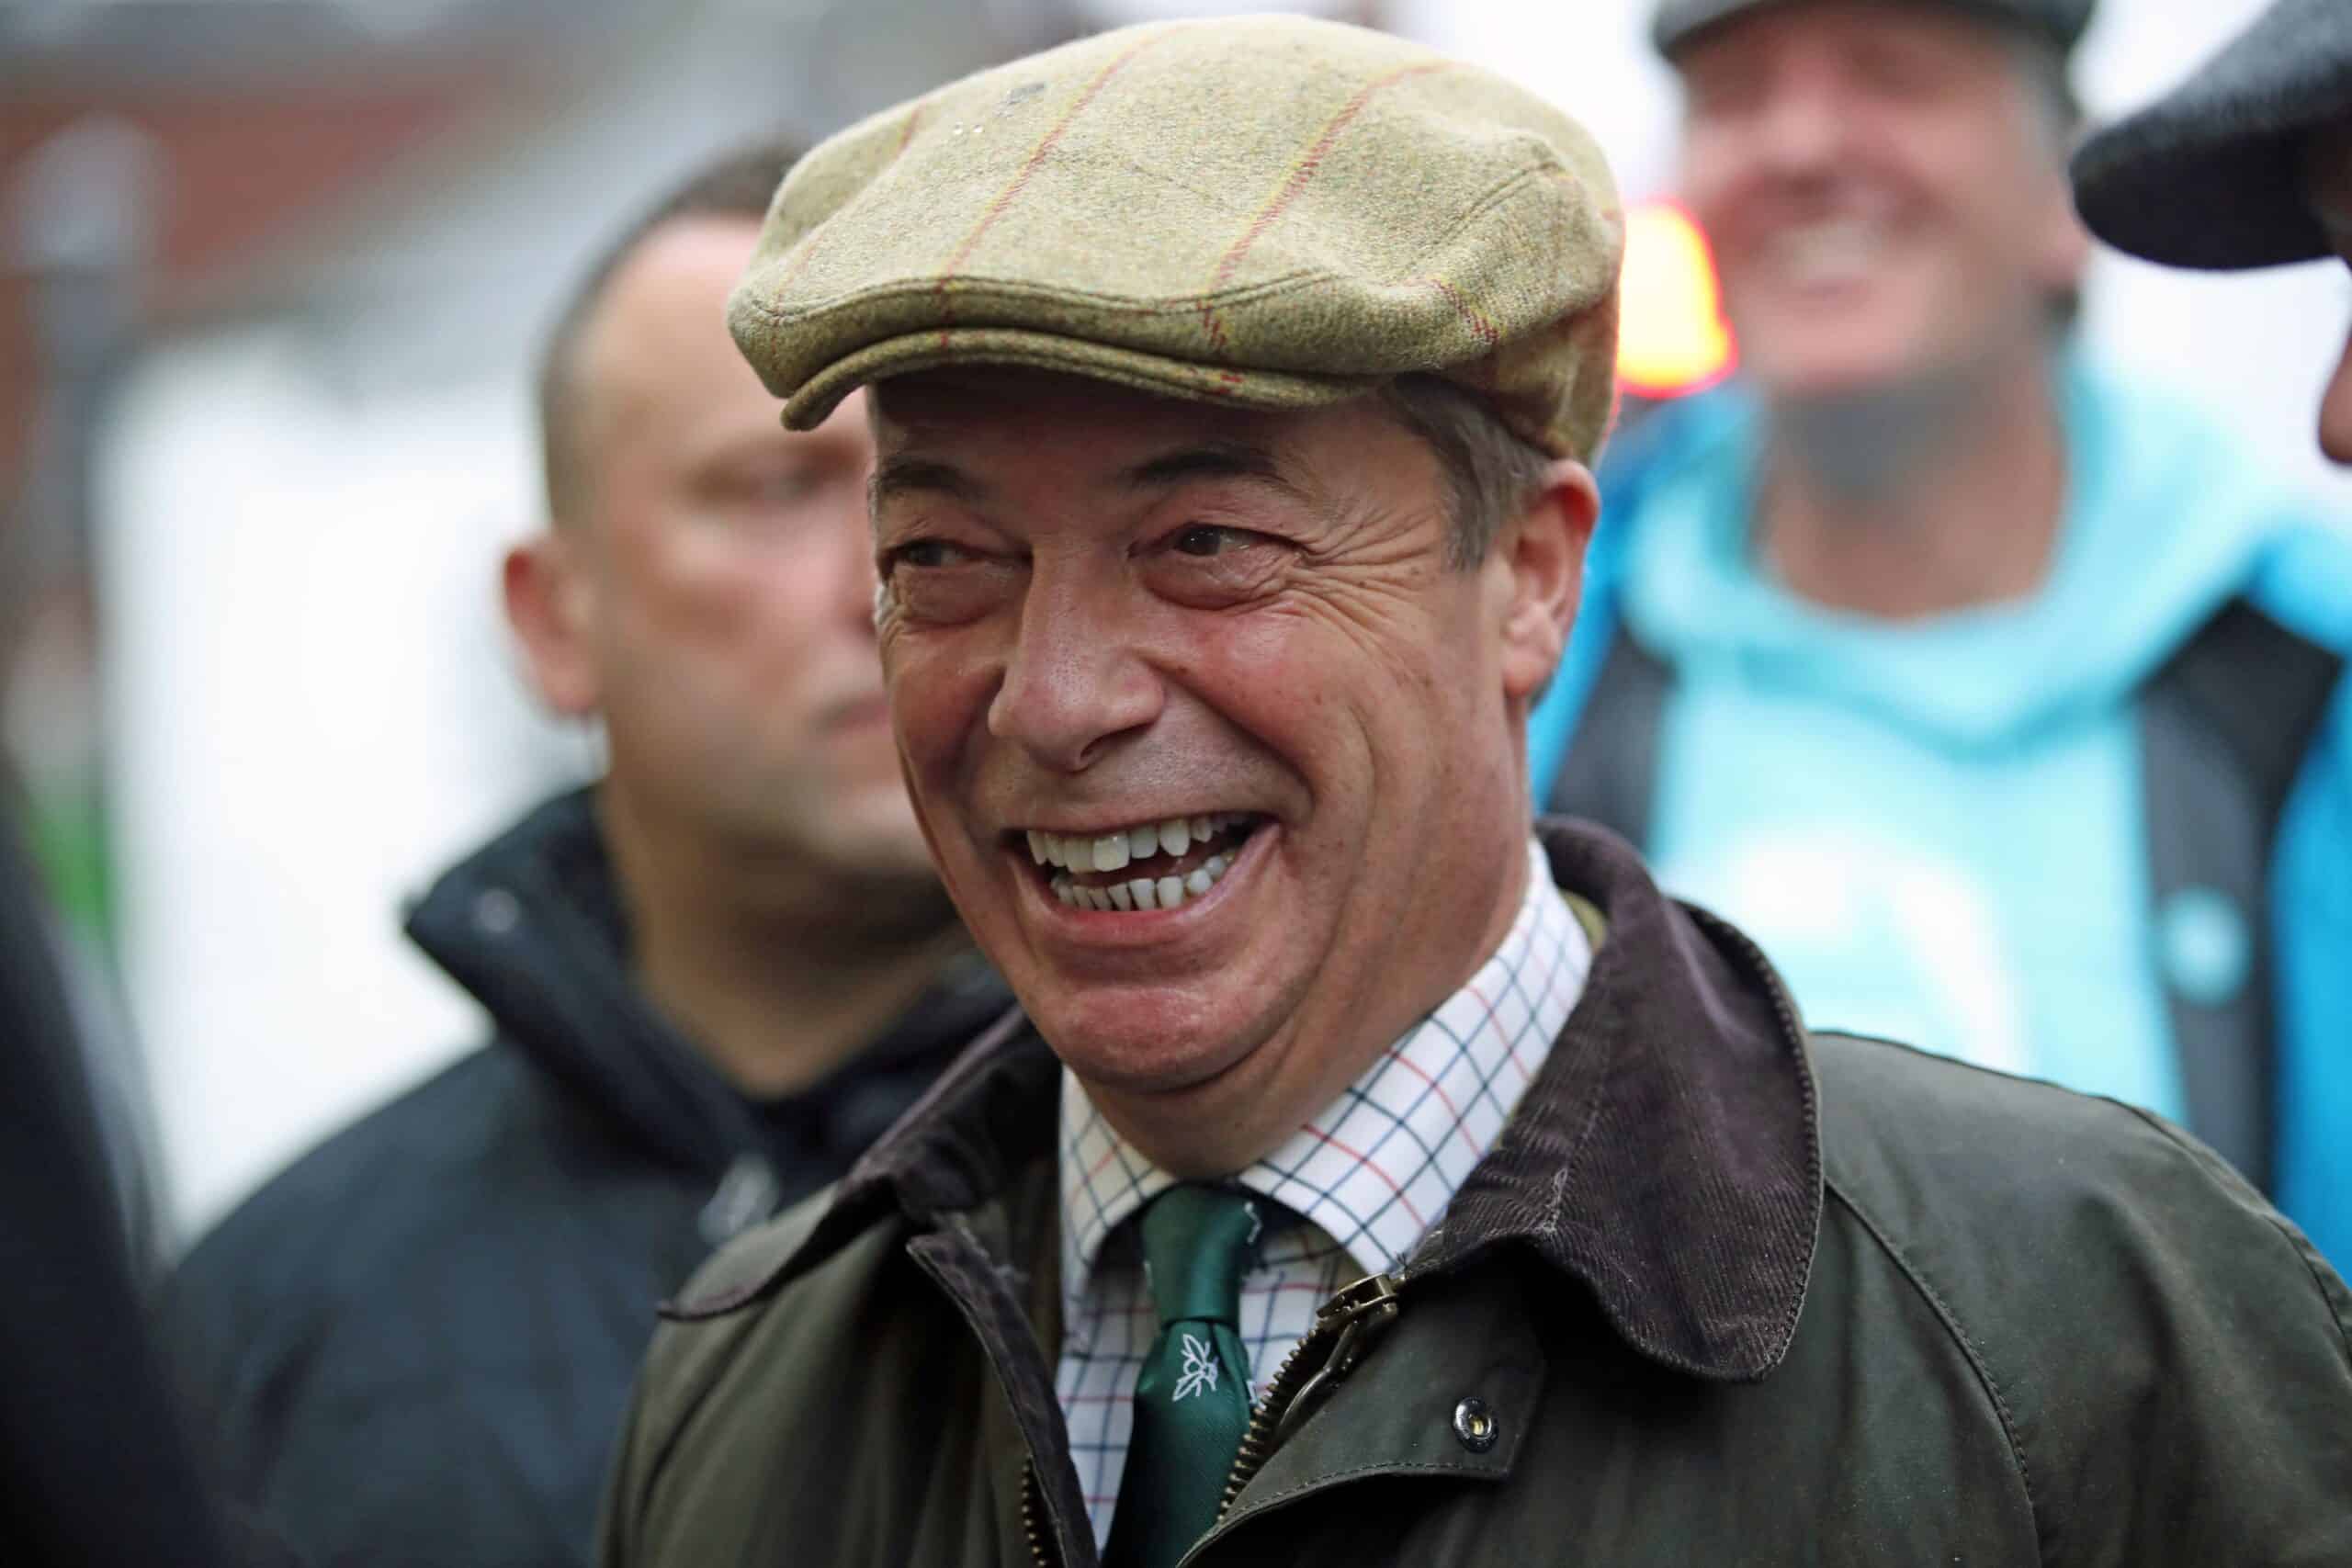 Revealed: The real reason Farage’s bank account was closed